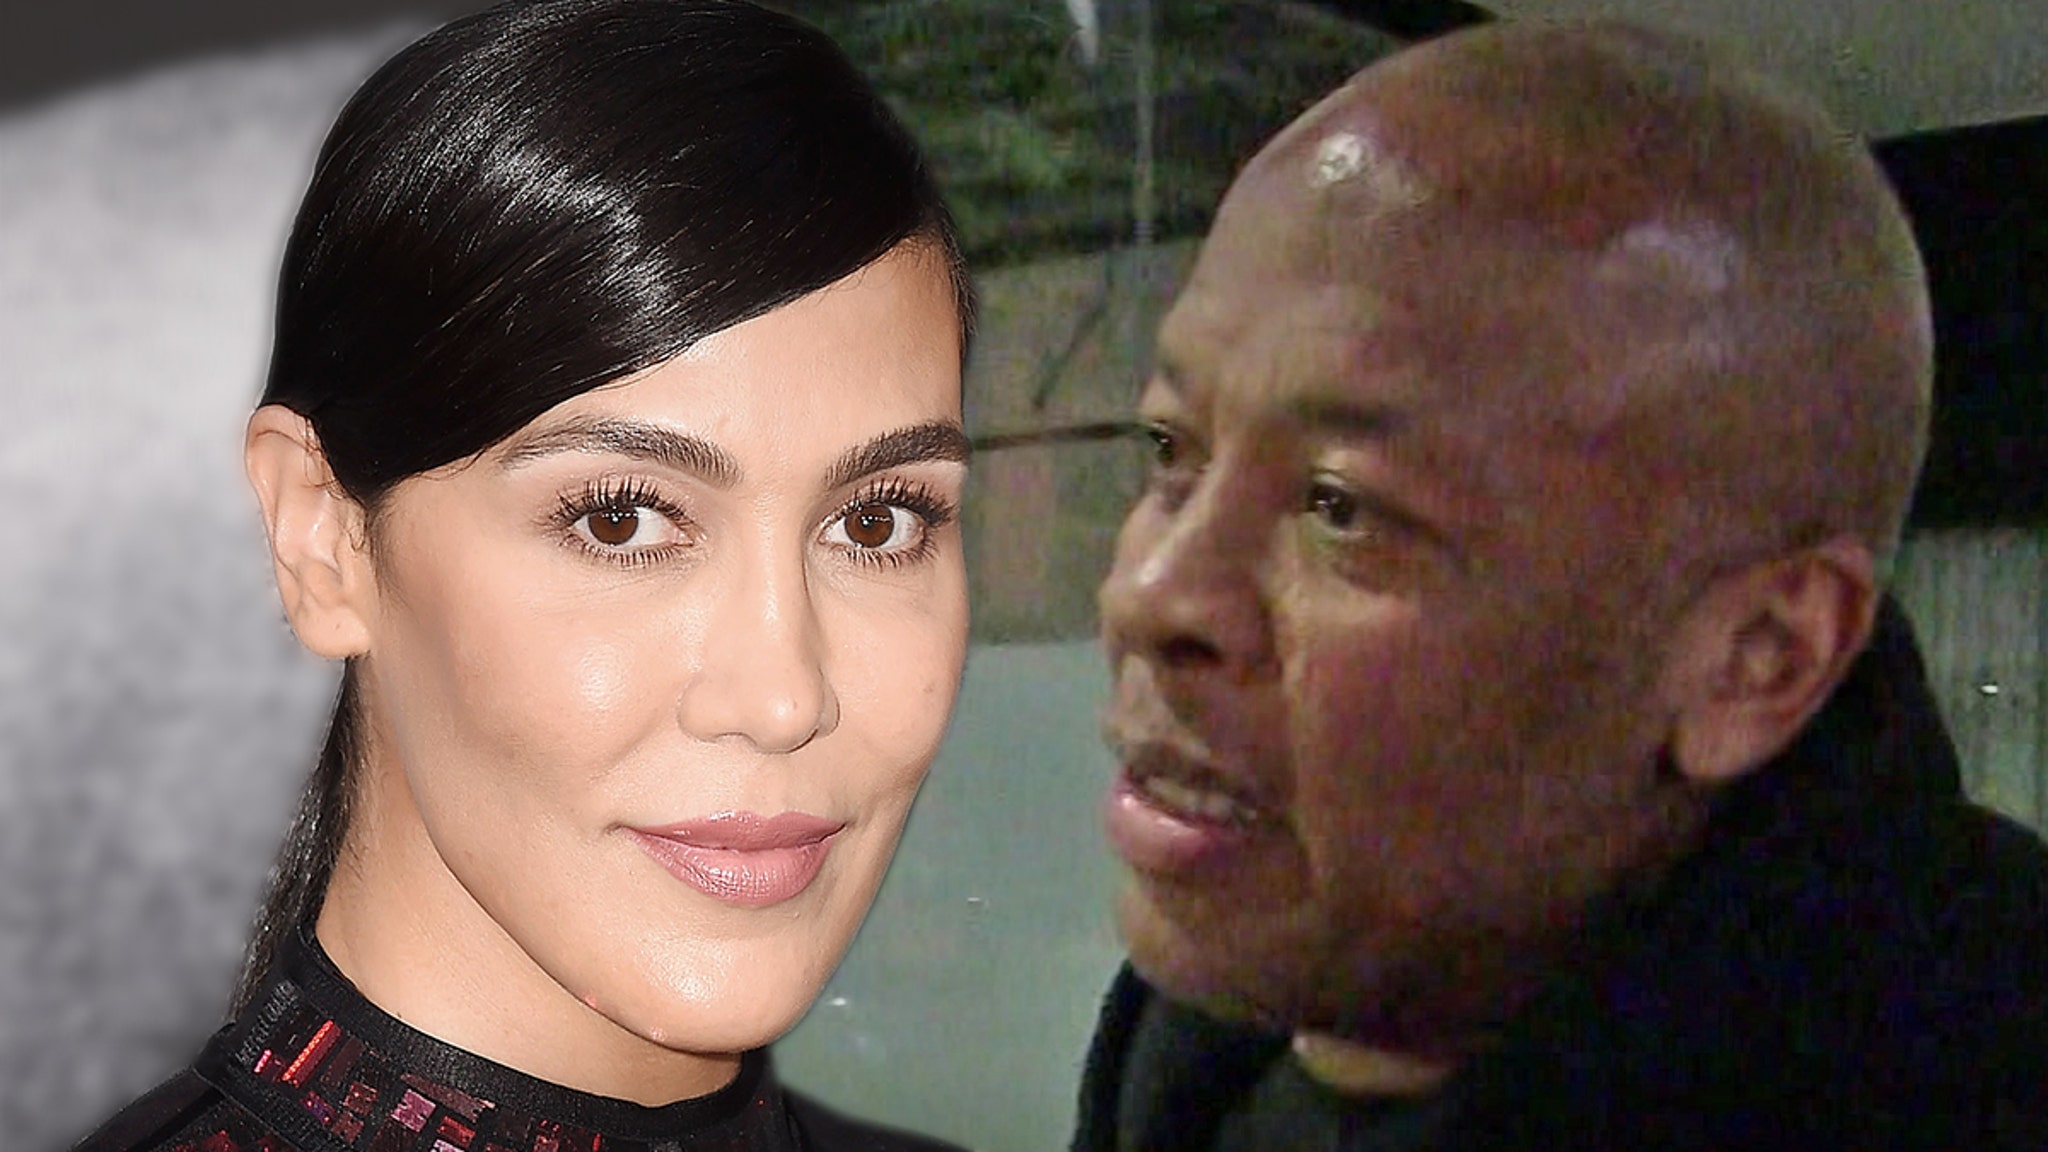 Dr.  Dre’s estranged wife claims he has $ 262 million in cash, apple stock